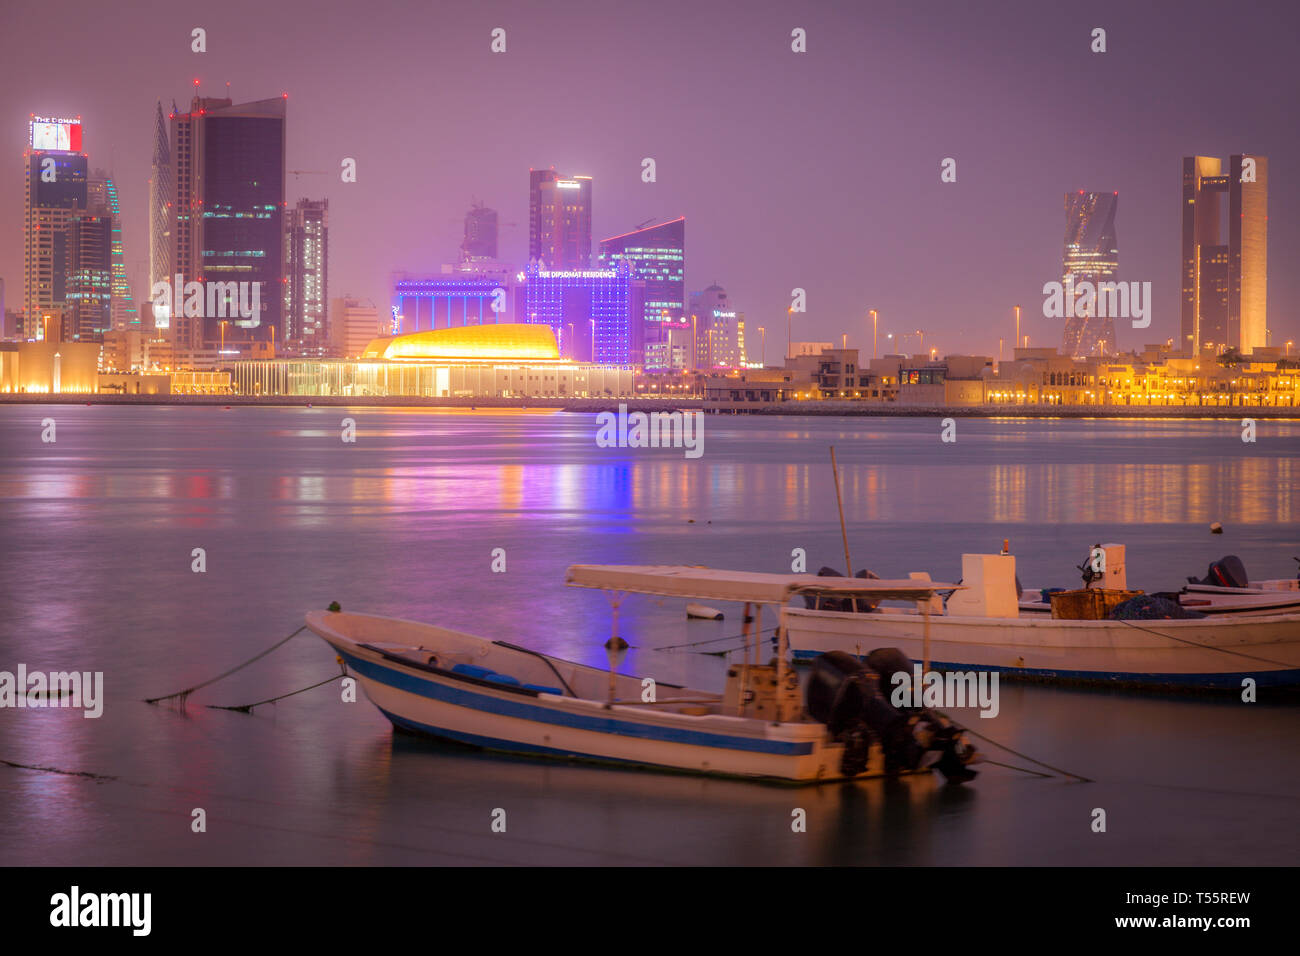 Moored motorboats by city skyline at night in Manama, Bahrain Stock Photo